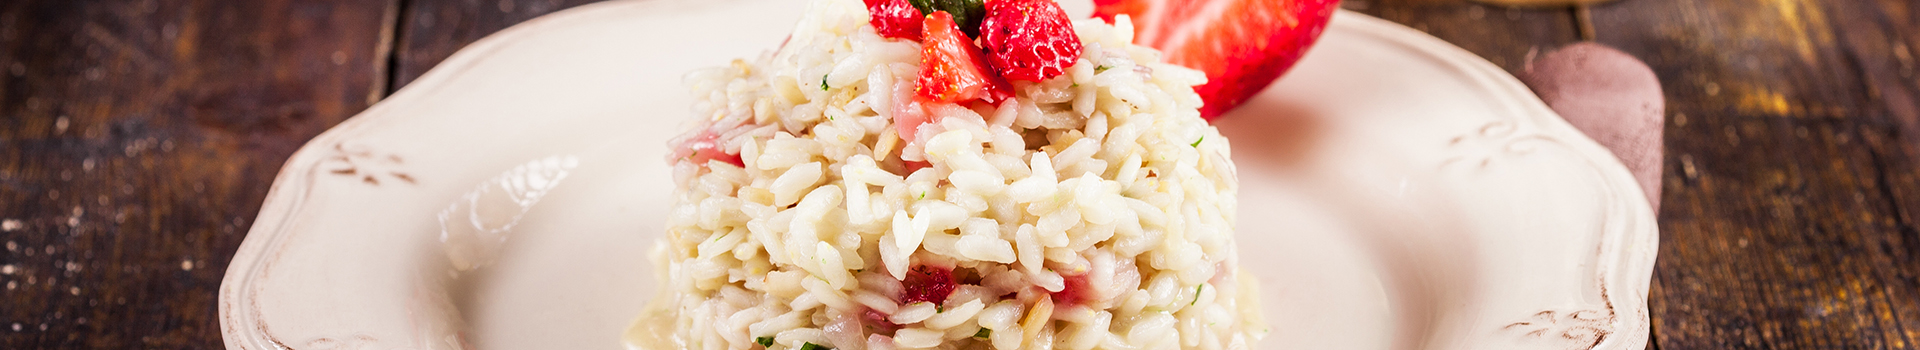 Fusion - Griddled Radicchio and Strawberry Risotto